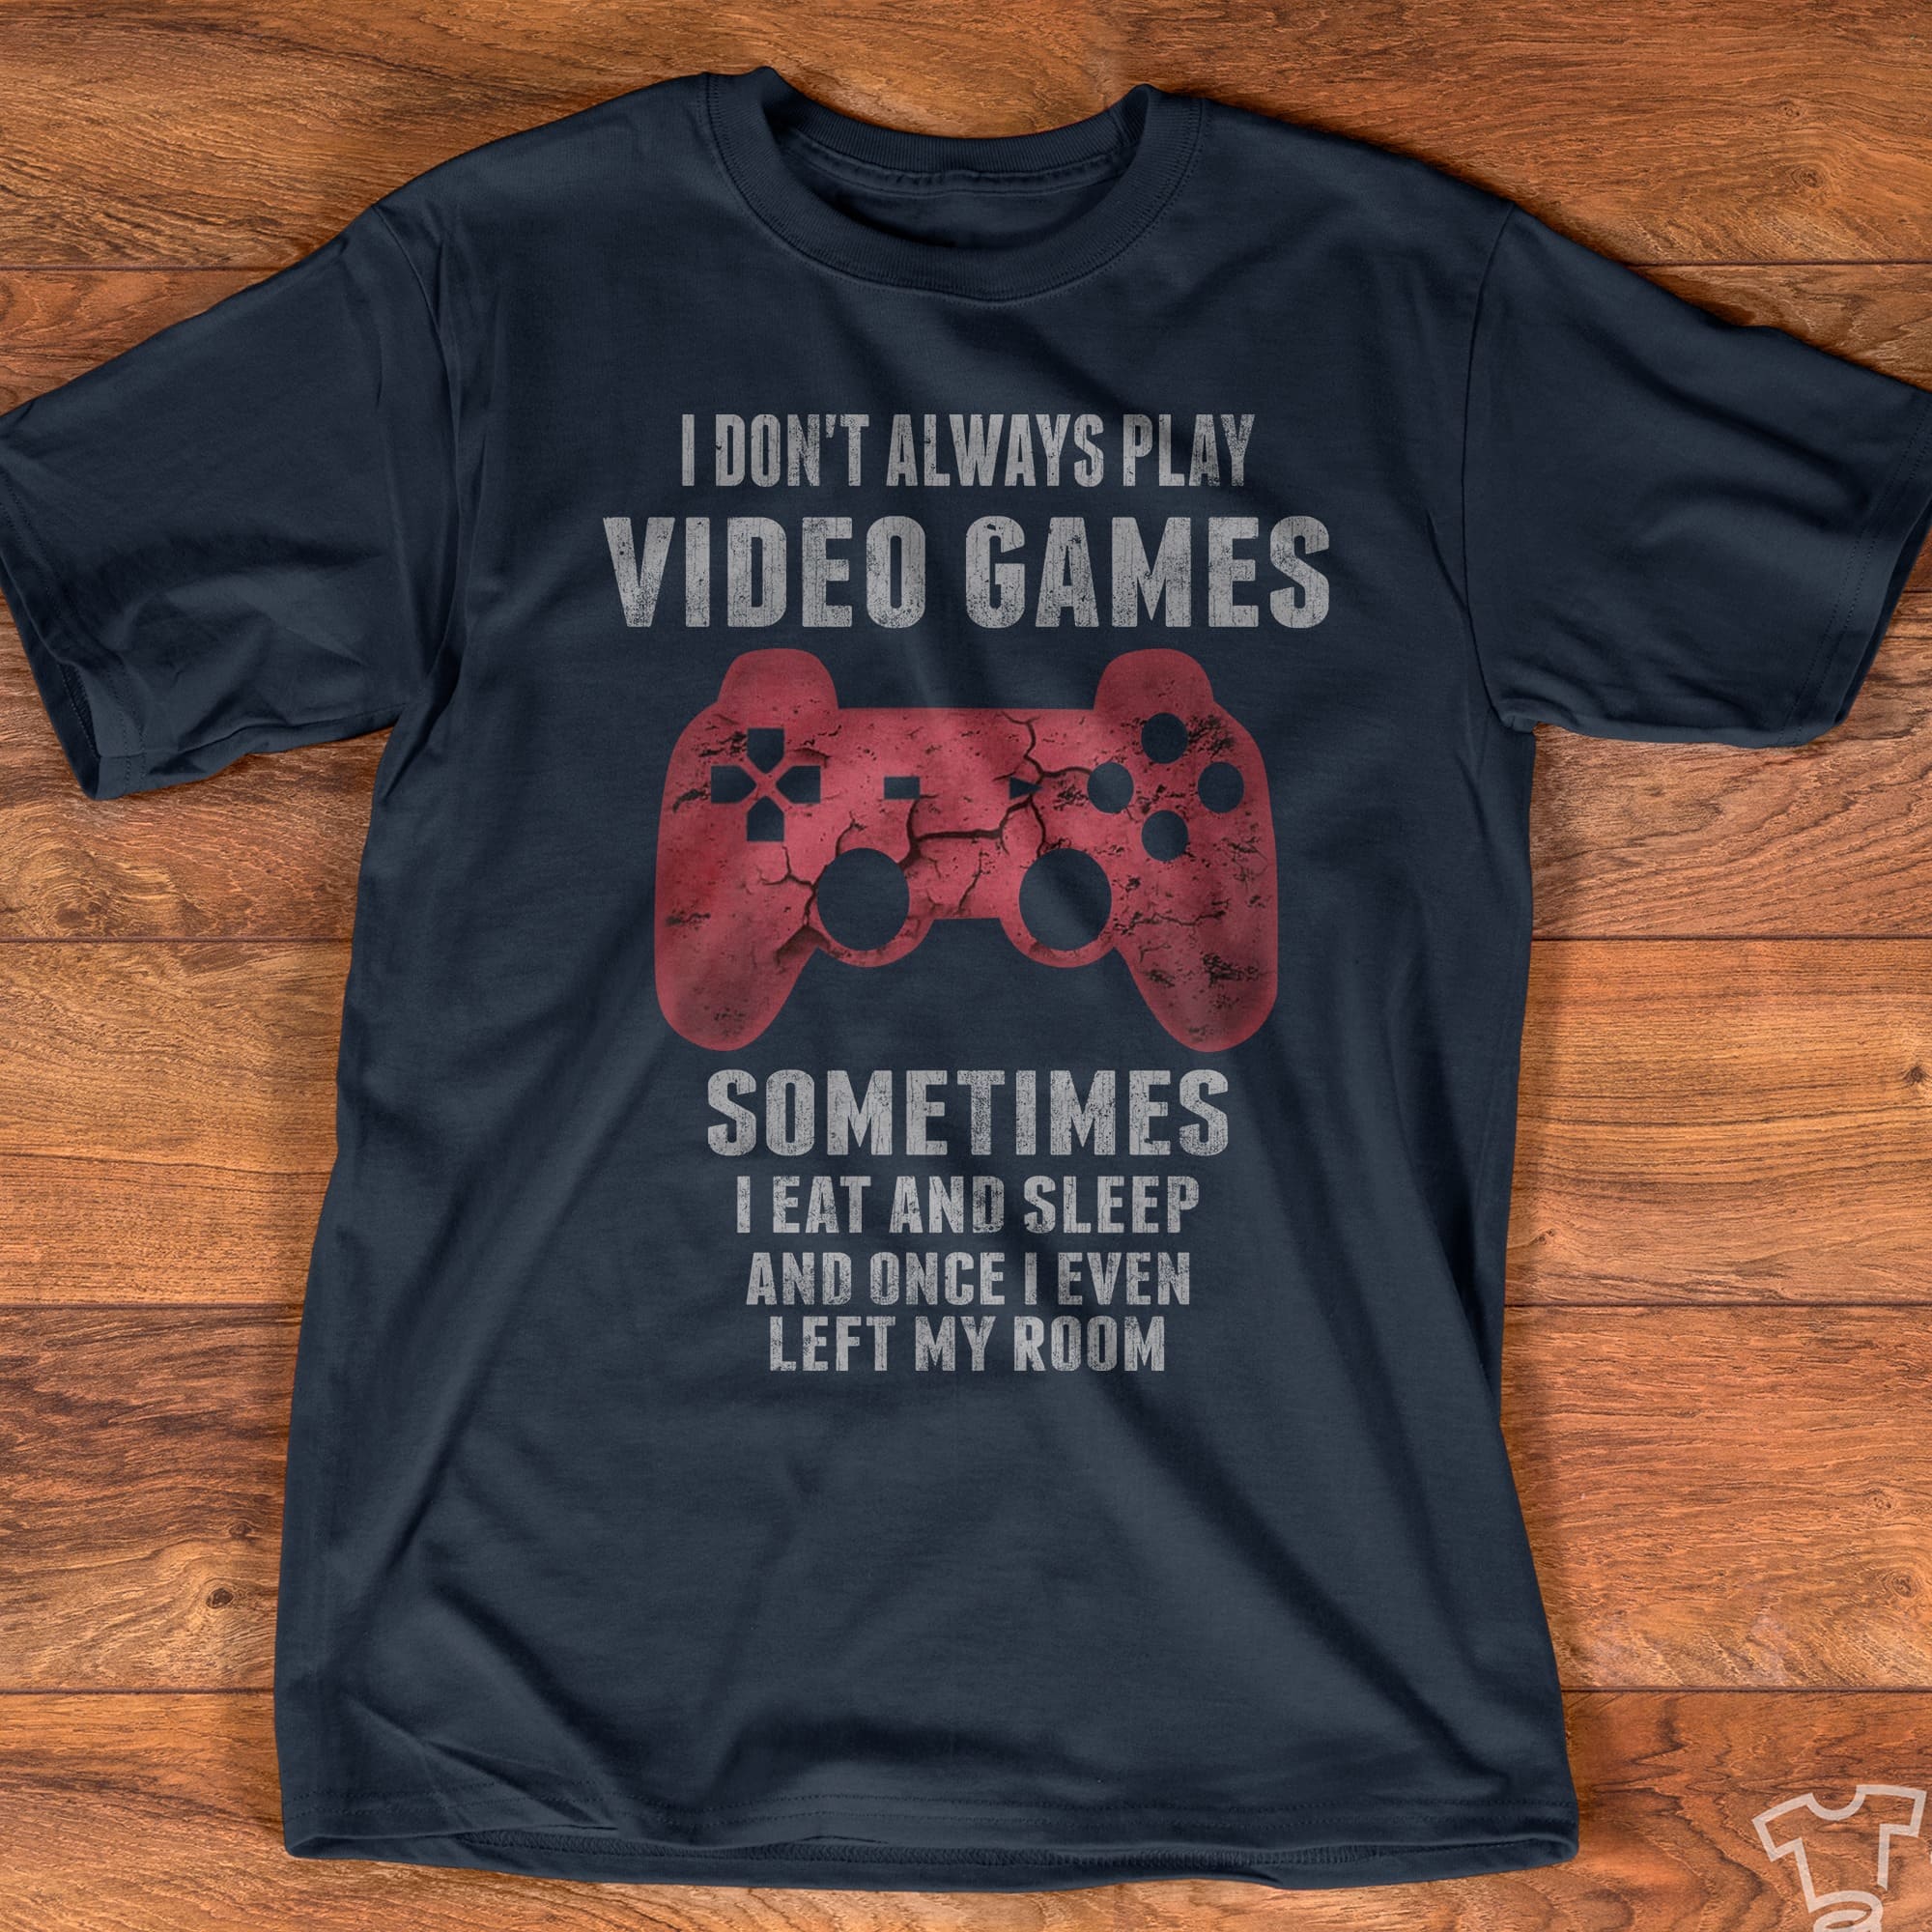 I don't always play video games sometimes I eat and sleep and once I even left my room - Video games the hobby